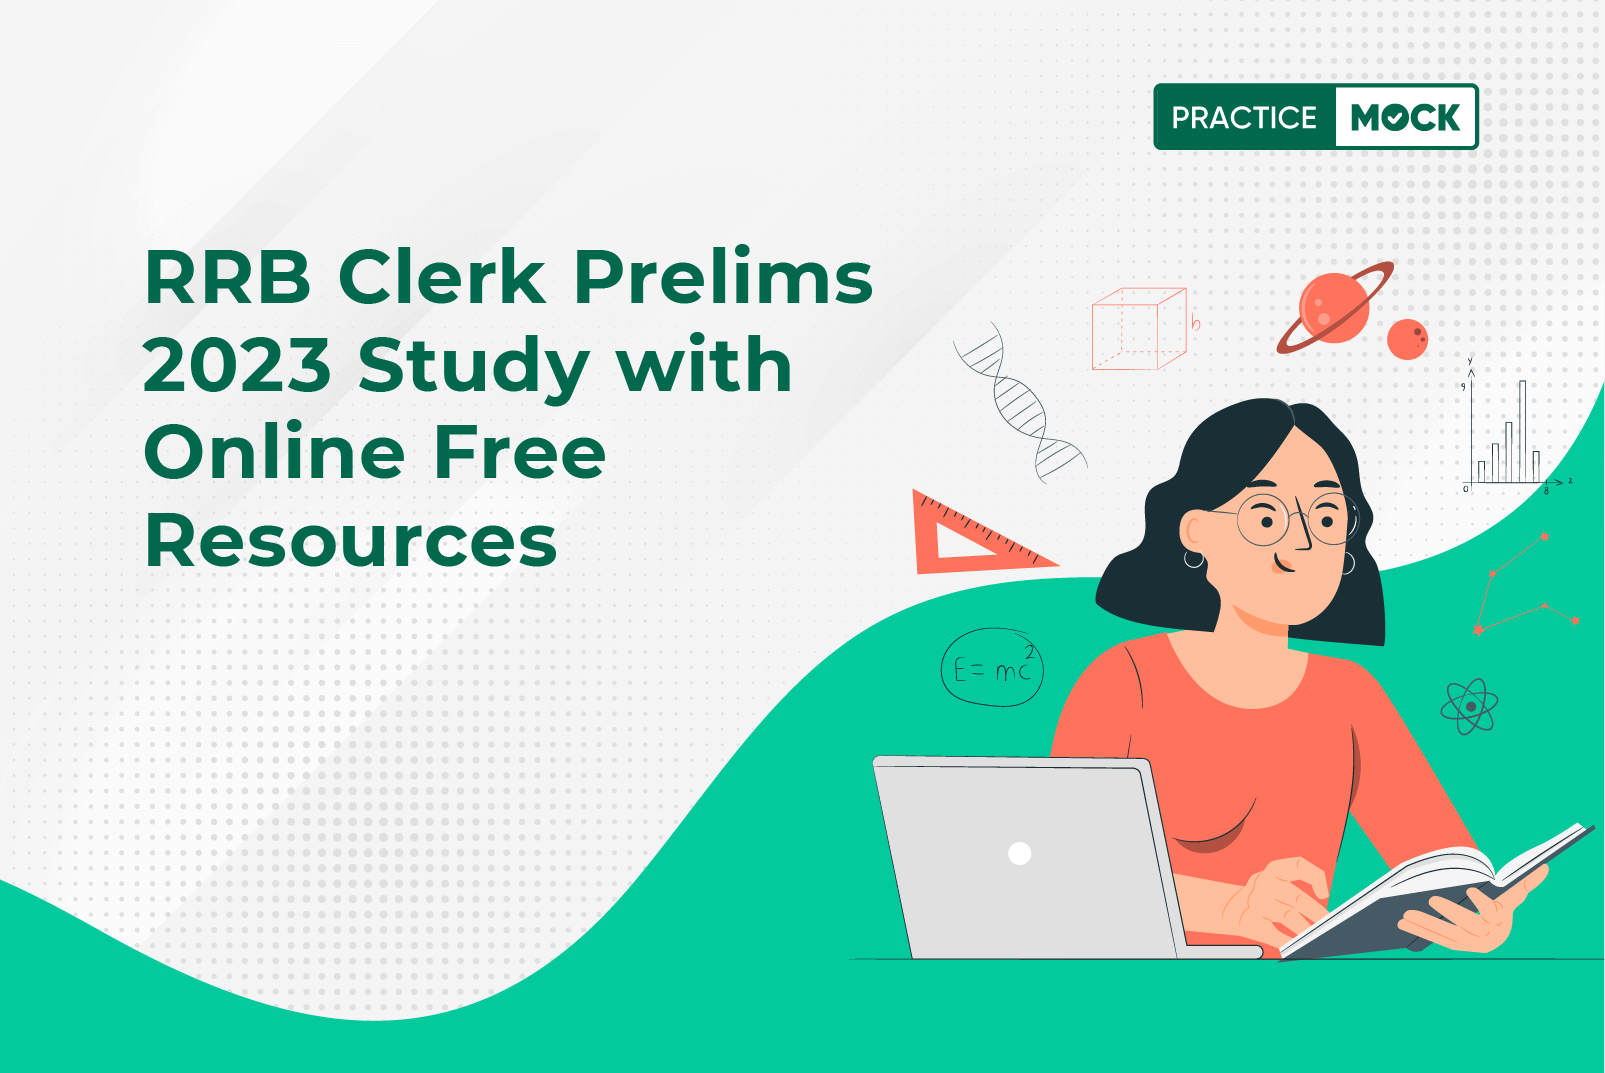 RRB-Clerk-Prelims-2023-Study-with-Online-Free-Resources